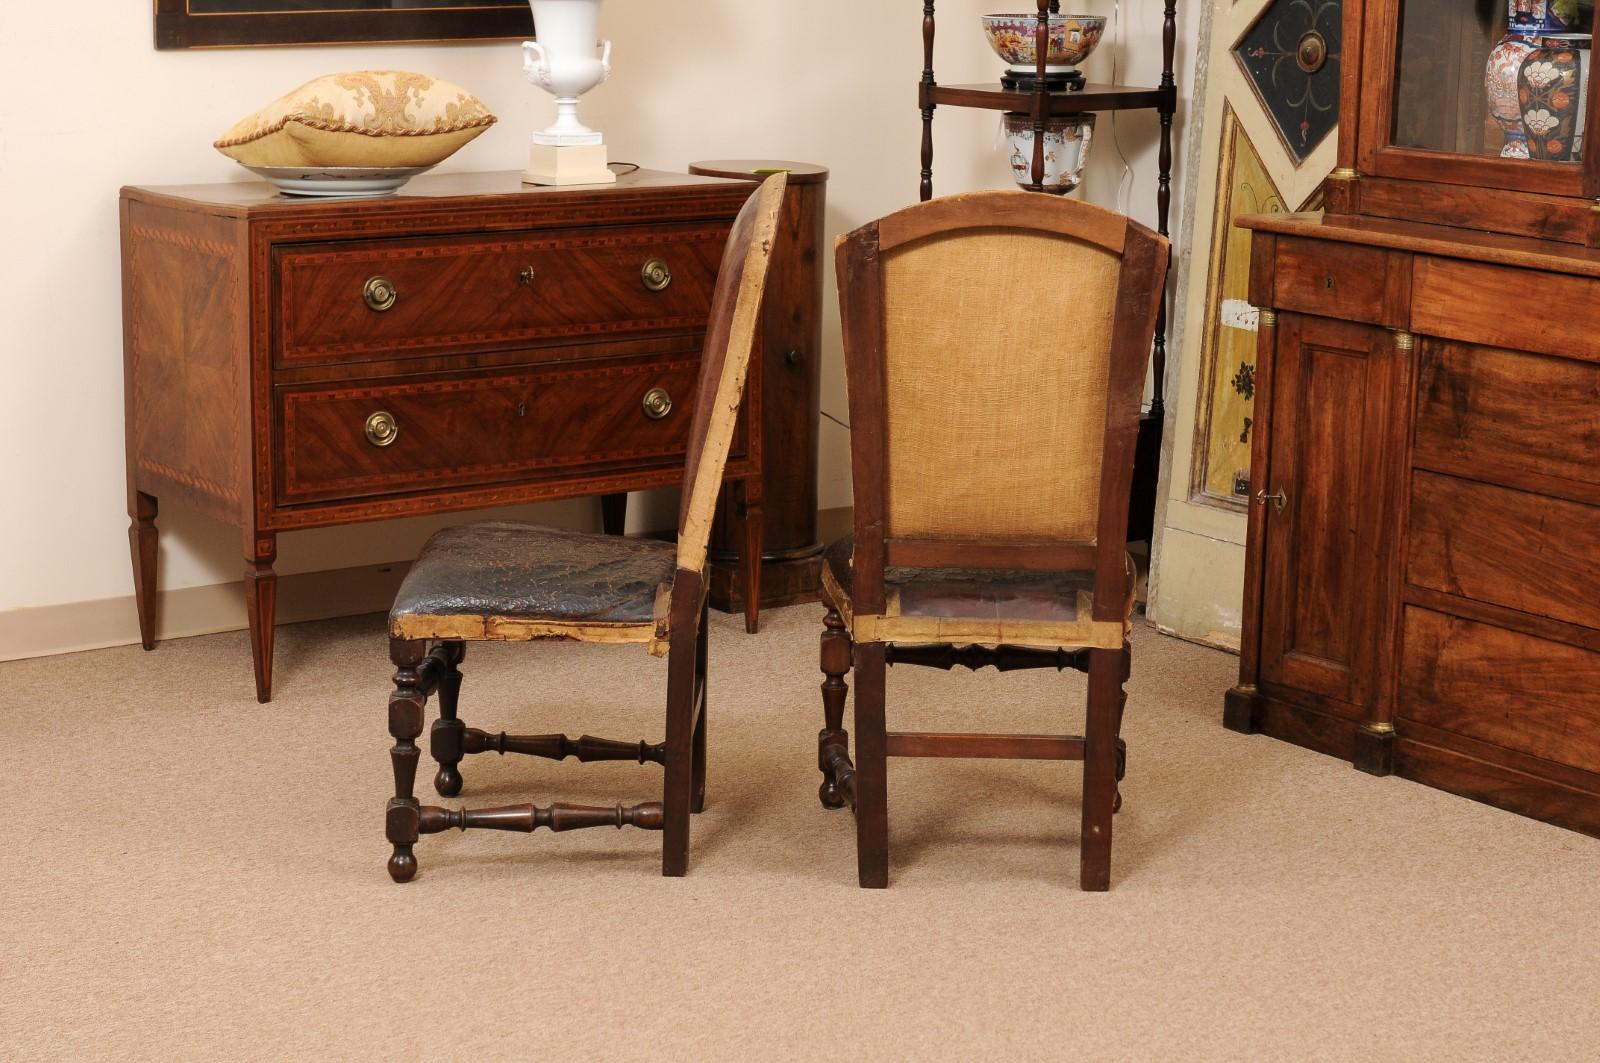 Pair of Large 18th Century Italian Walnut Hall Chairs with Leather Upholstery  For Sale 5